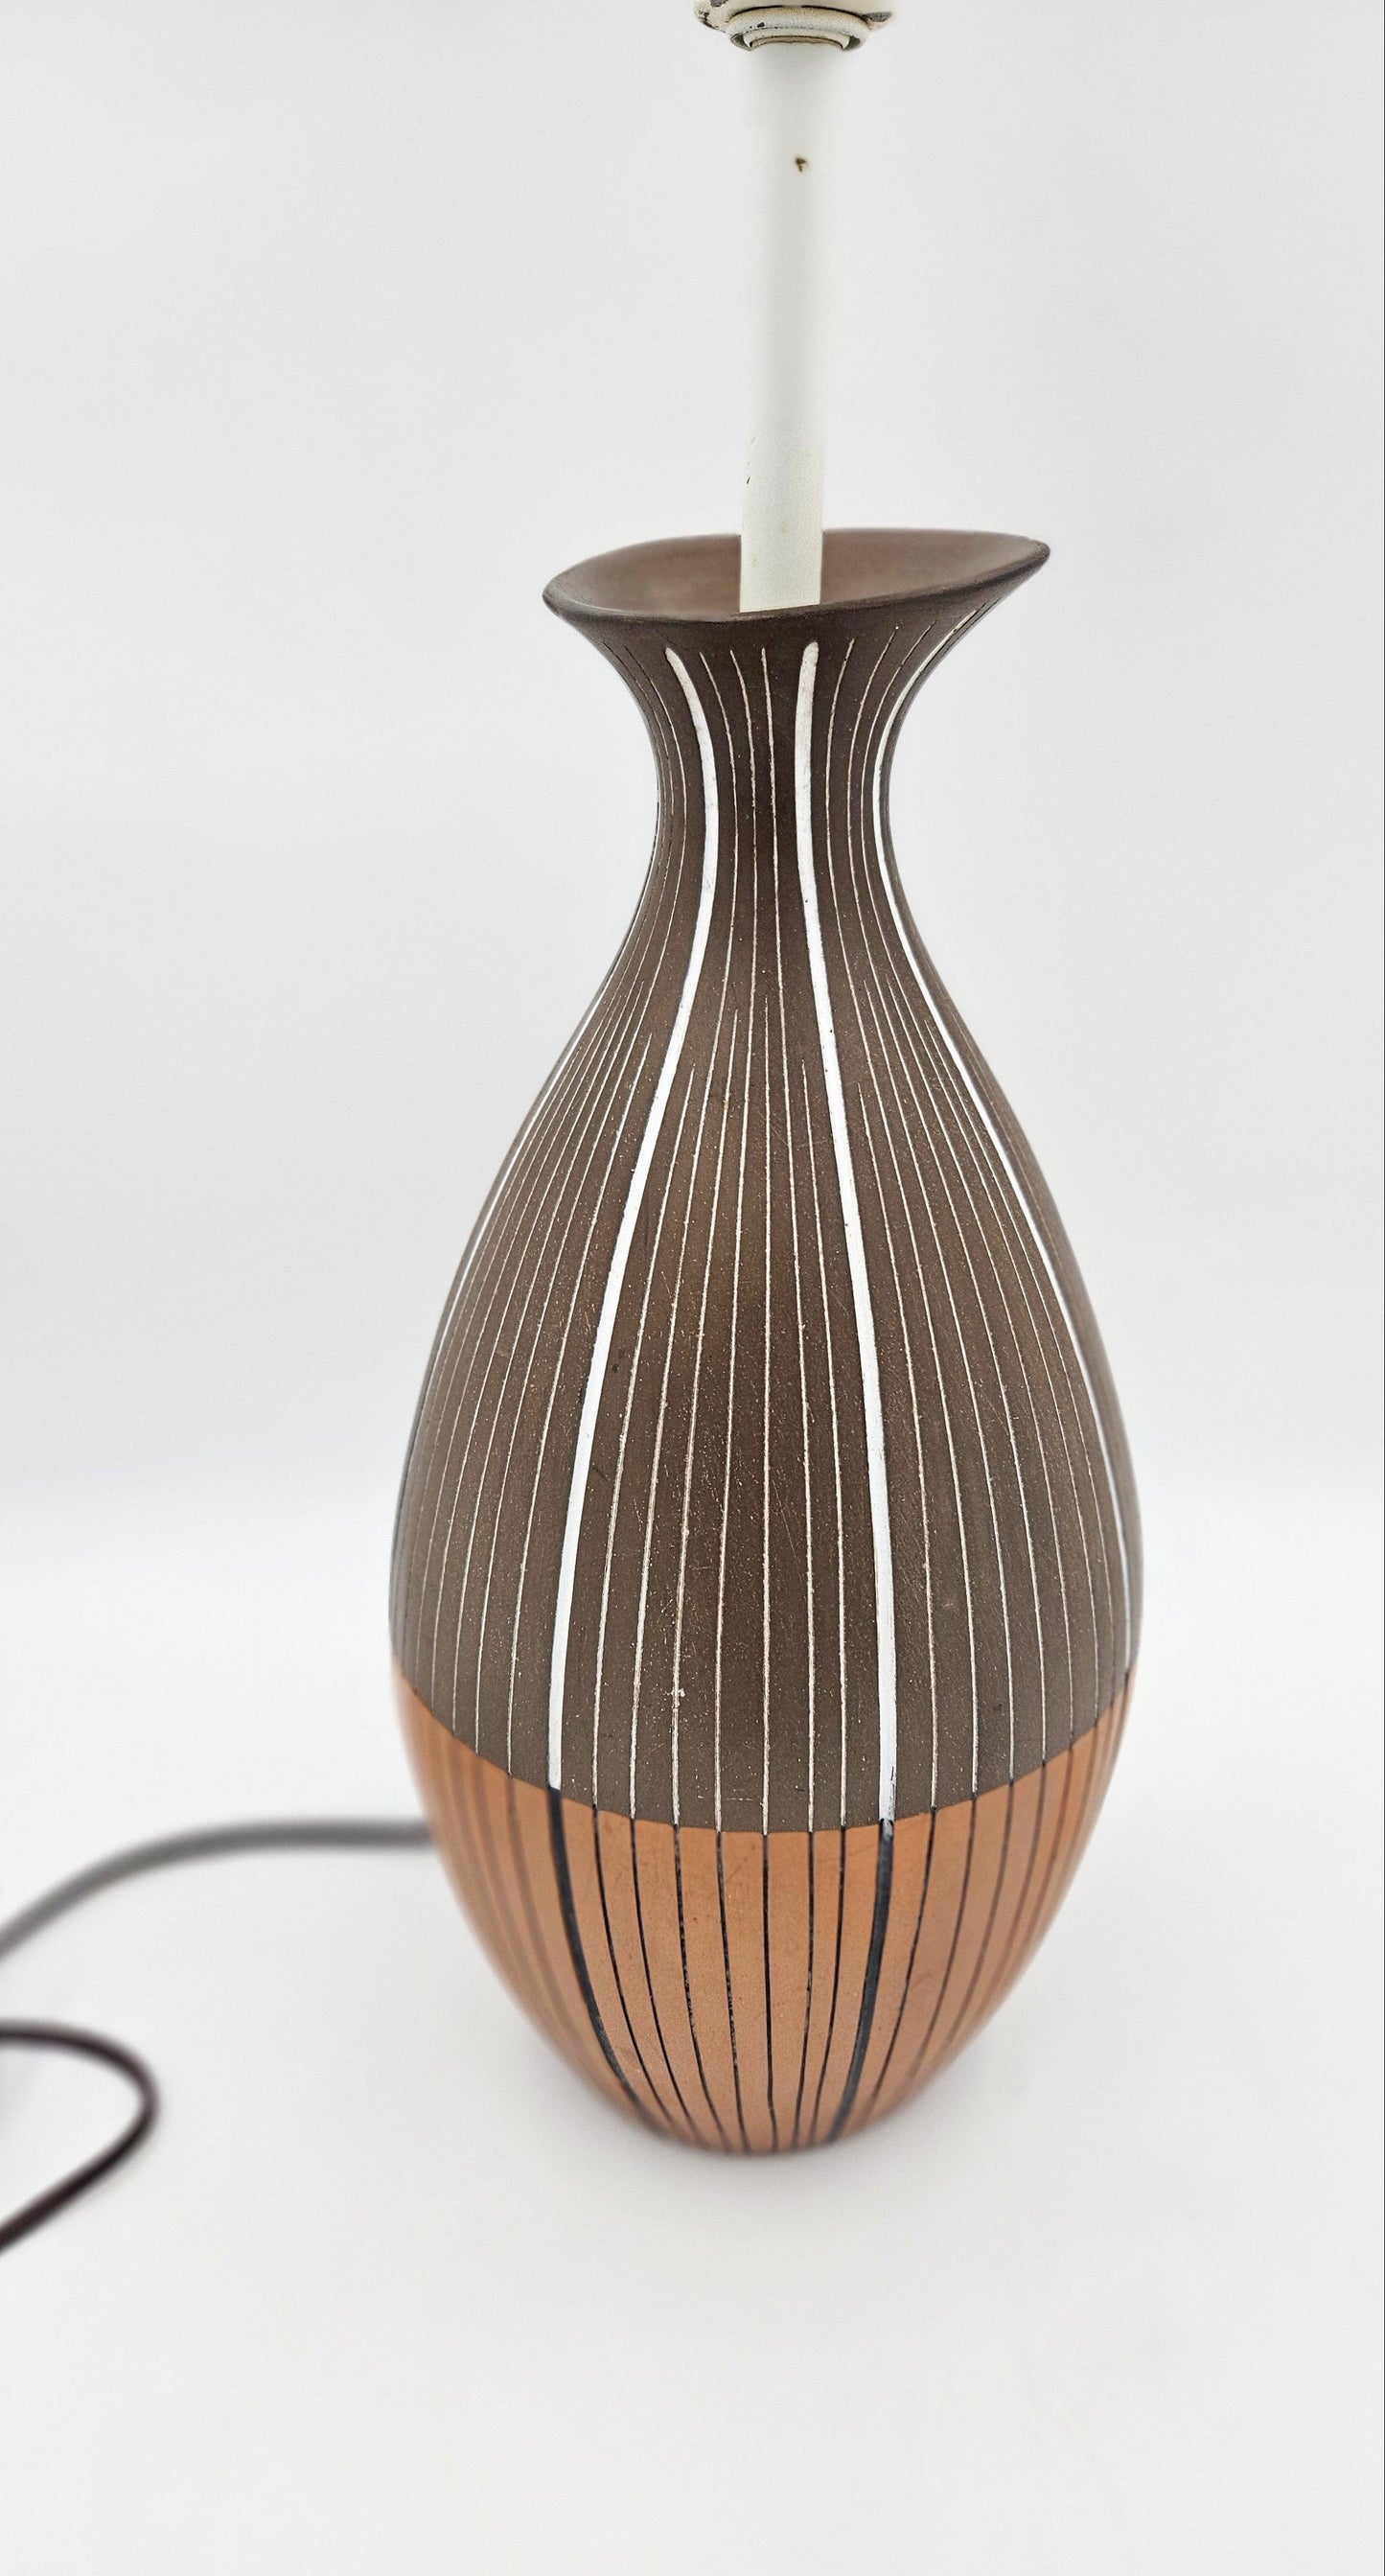 Ugo Zaccagnini Italy for Raymor Bitossi Lighting MCM Ugo Zaccagnini Italy Raymor Bitossi Ceramic Table Lamp #4000 Signed